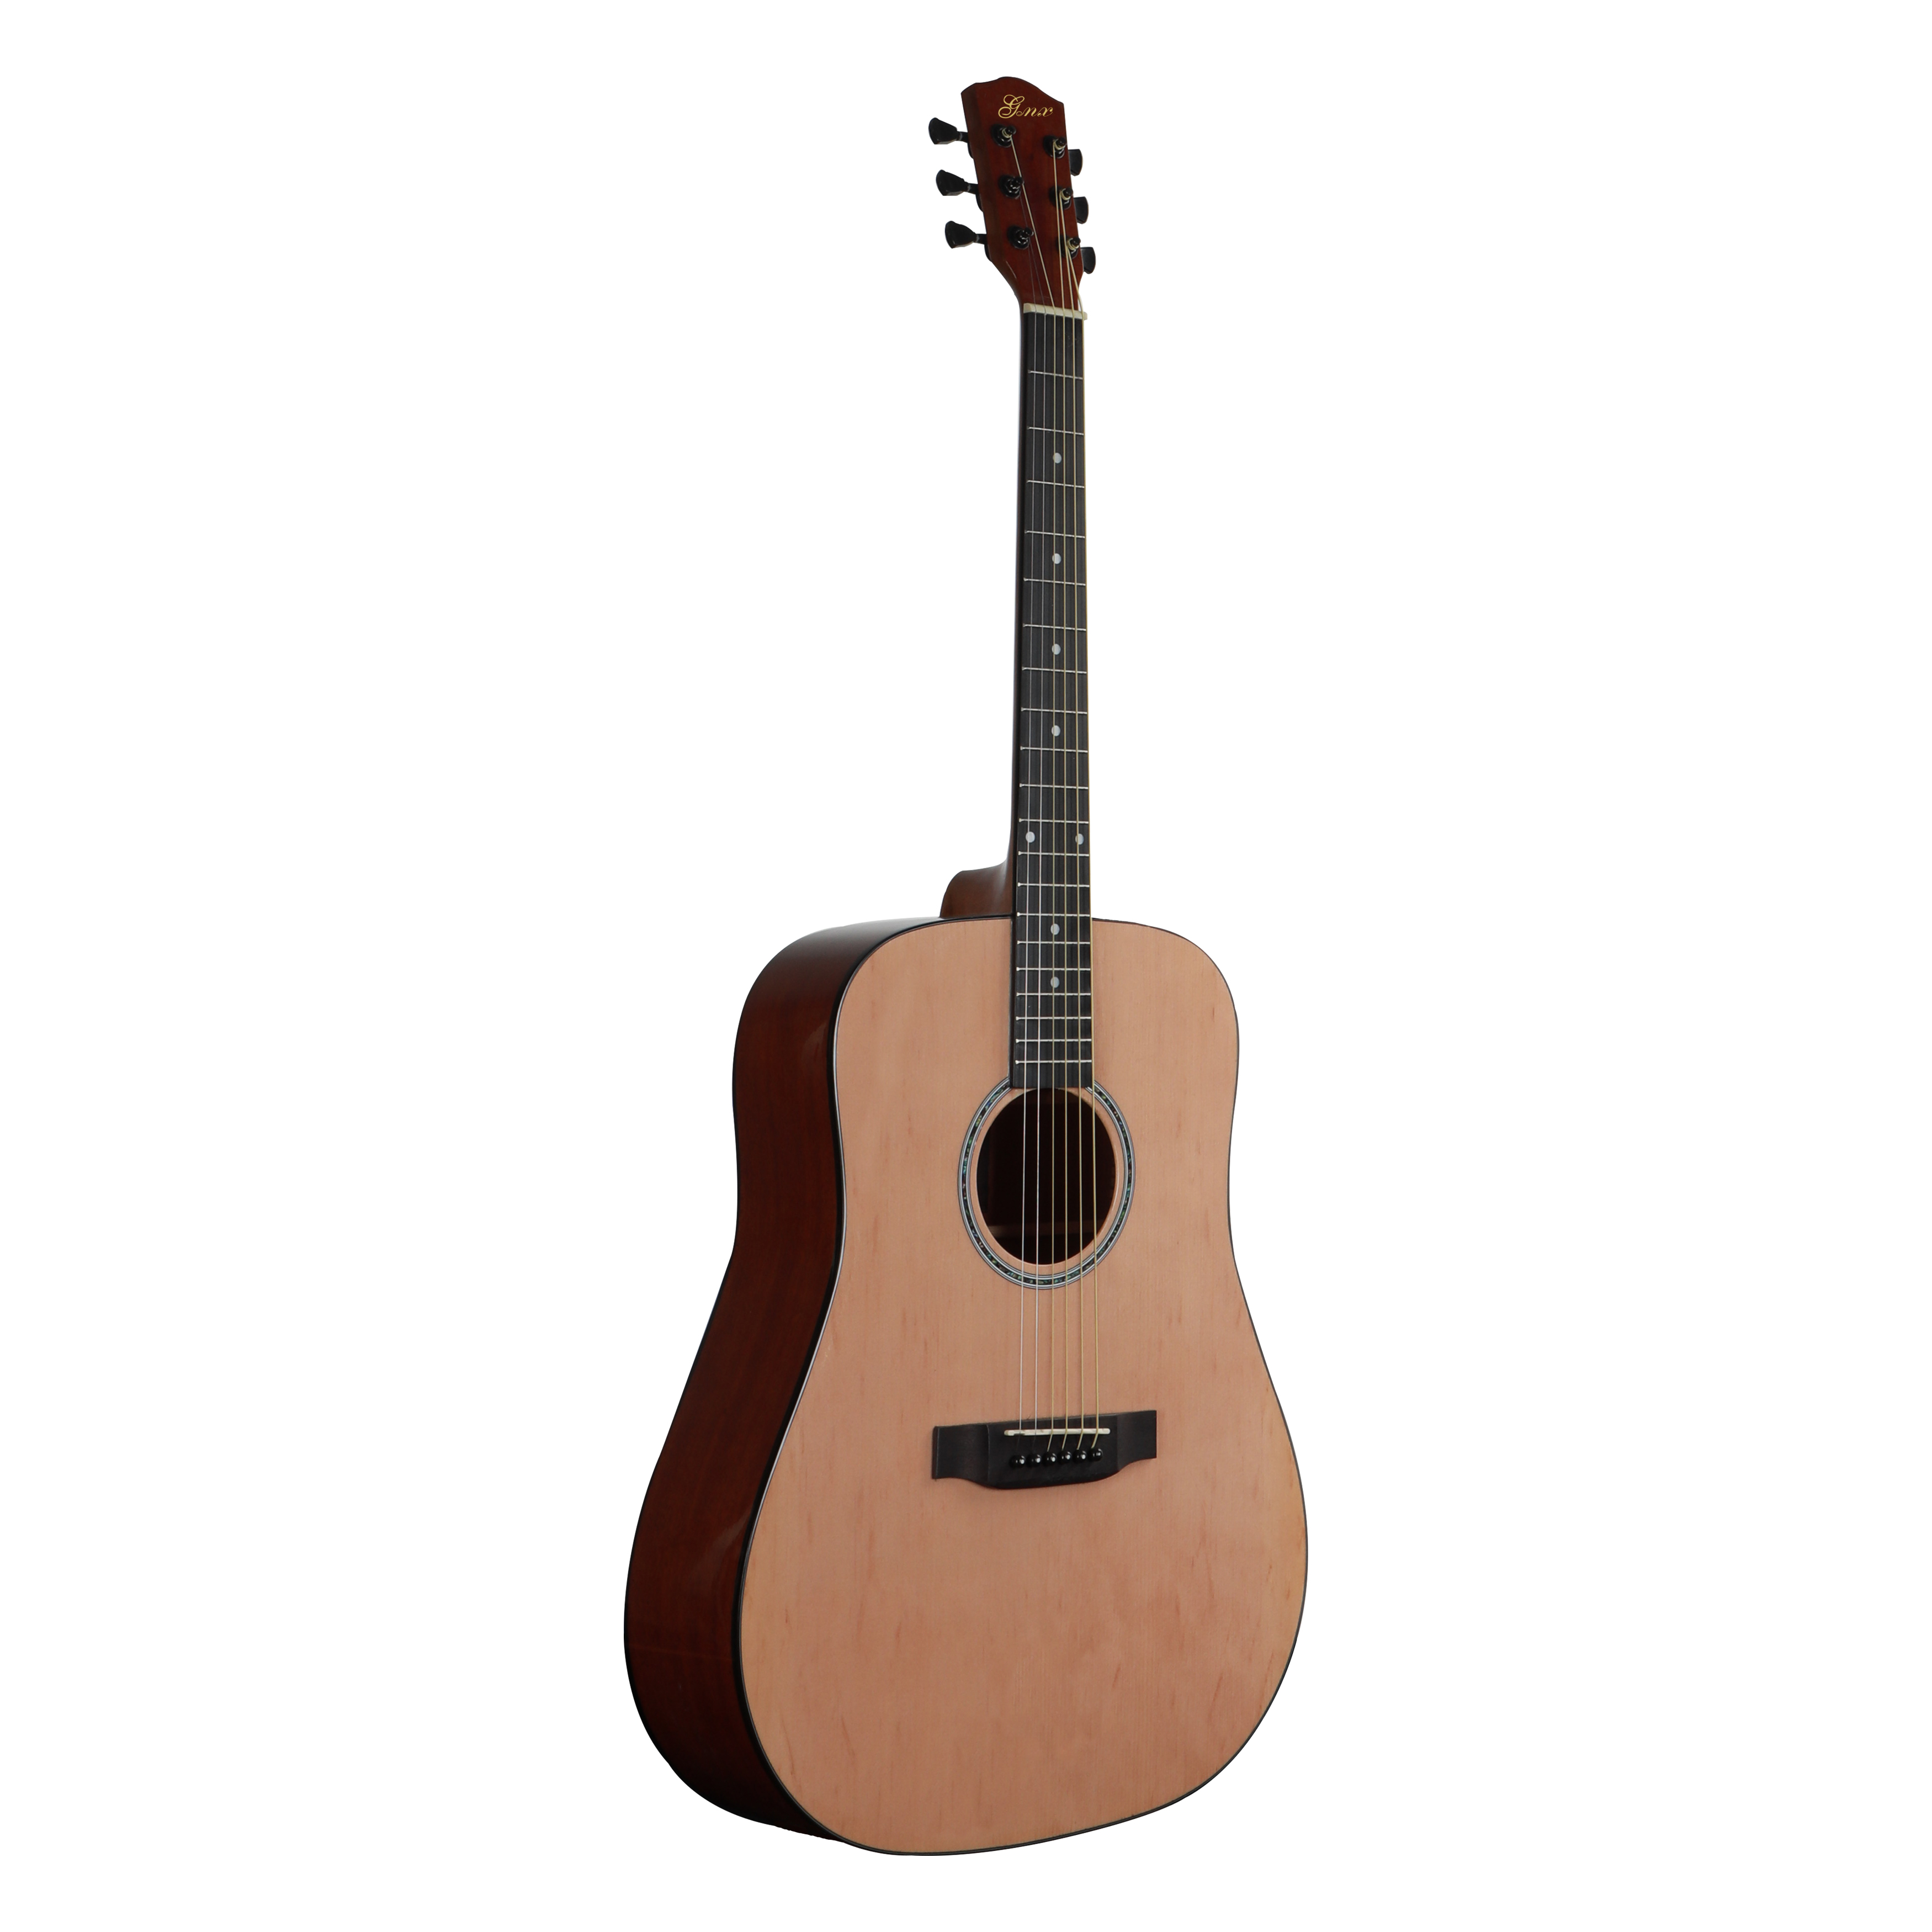 Dreadnought41 inch Spruce Top with Sapele Back&Side acoustic guitar.